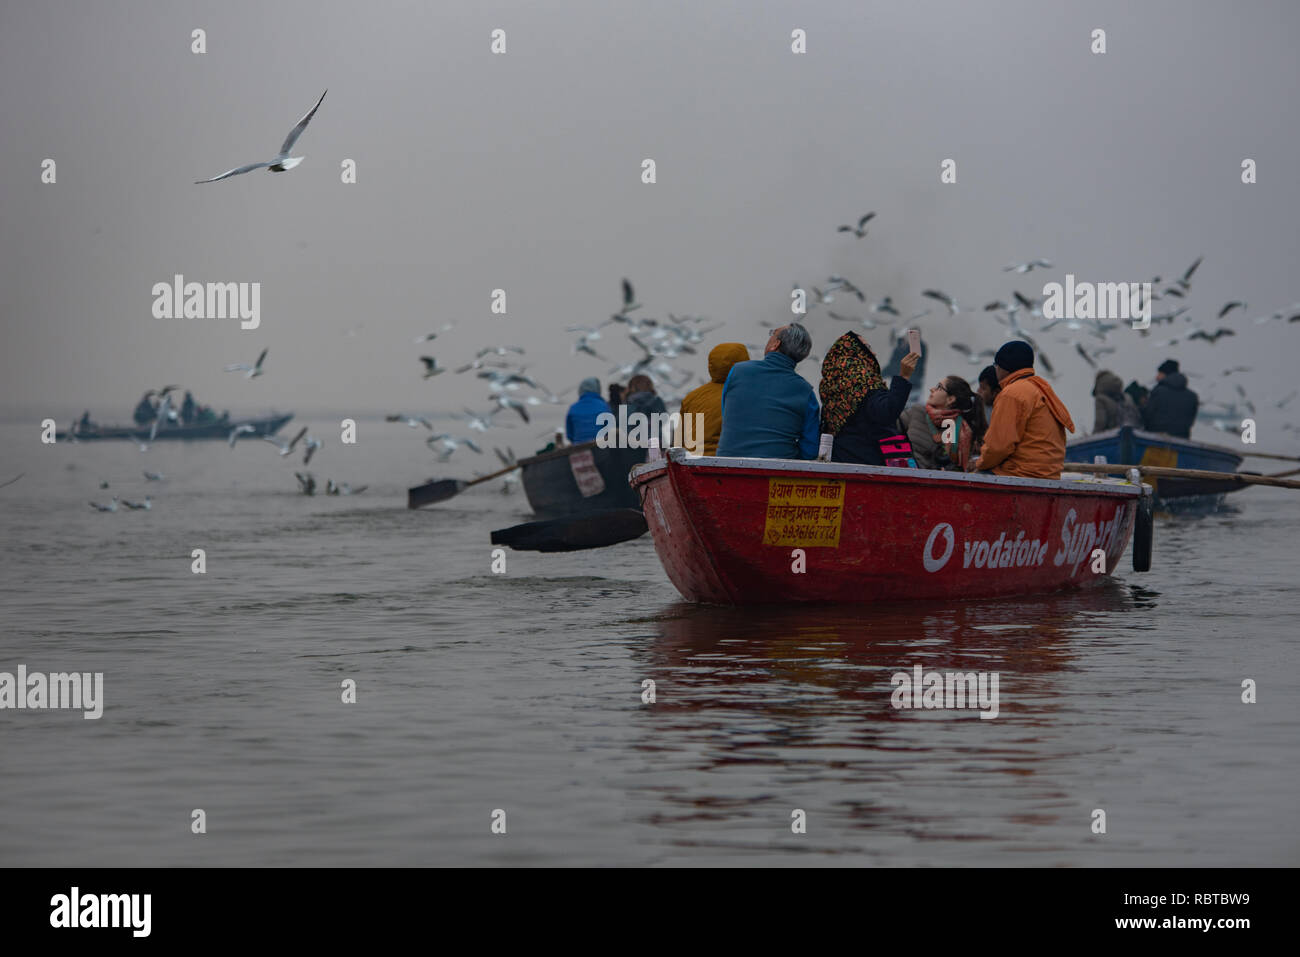 Boats on the Ganges early in the morning in Varanasi, India with people looking at a swarm of gulls attracted by feed provided by the boatmen. Stock Photo